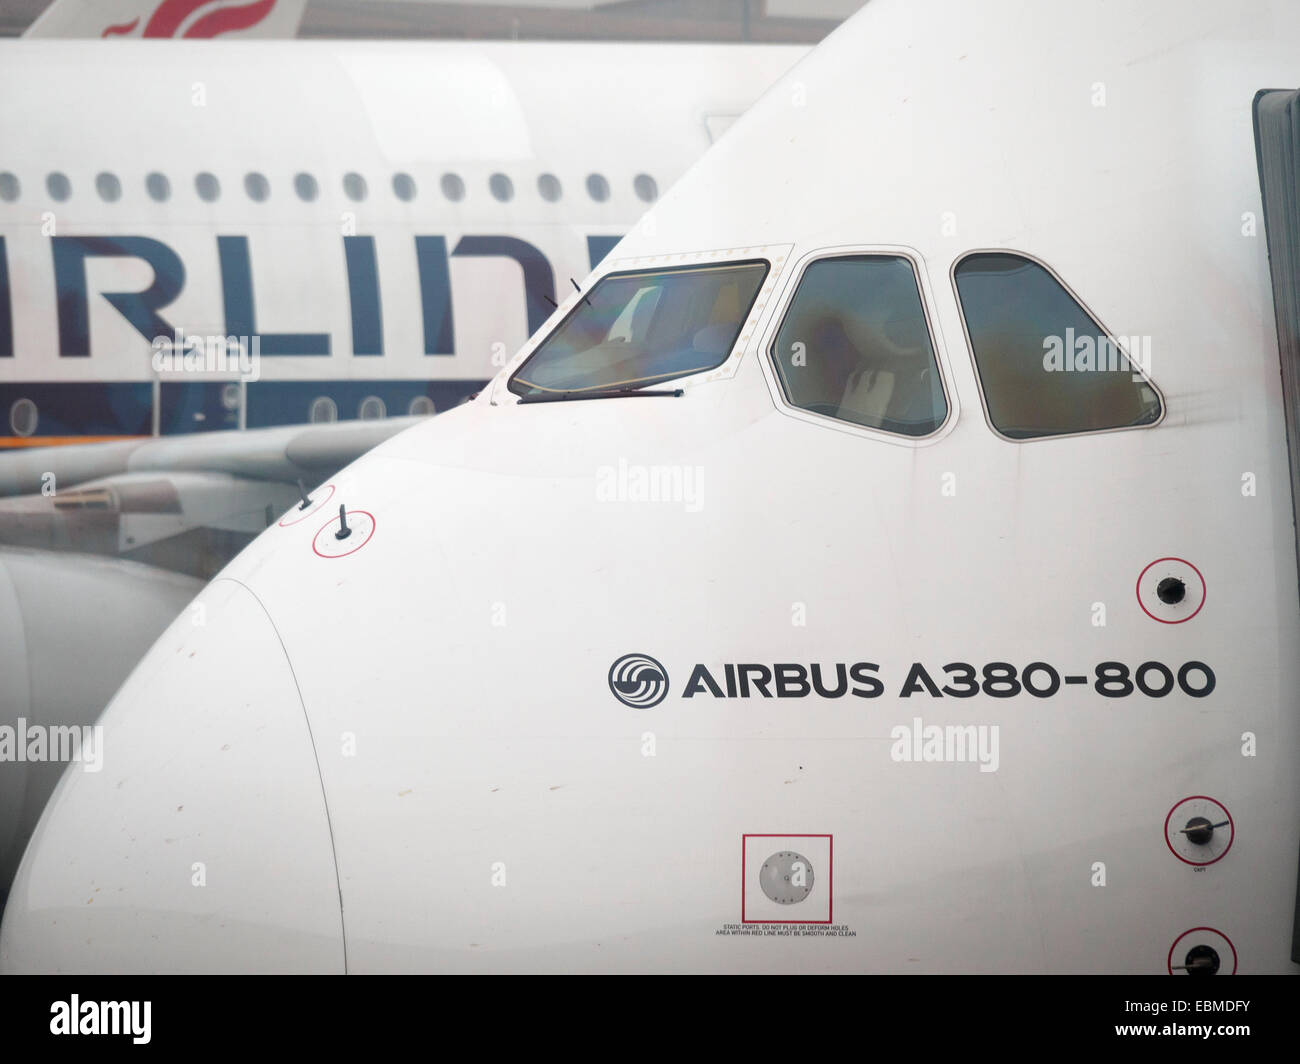 Airbus A380-800 airplane Stock Photo